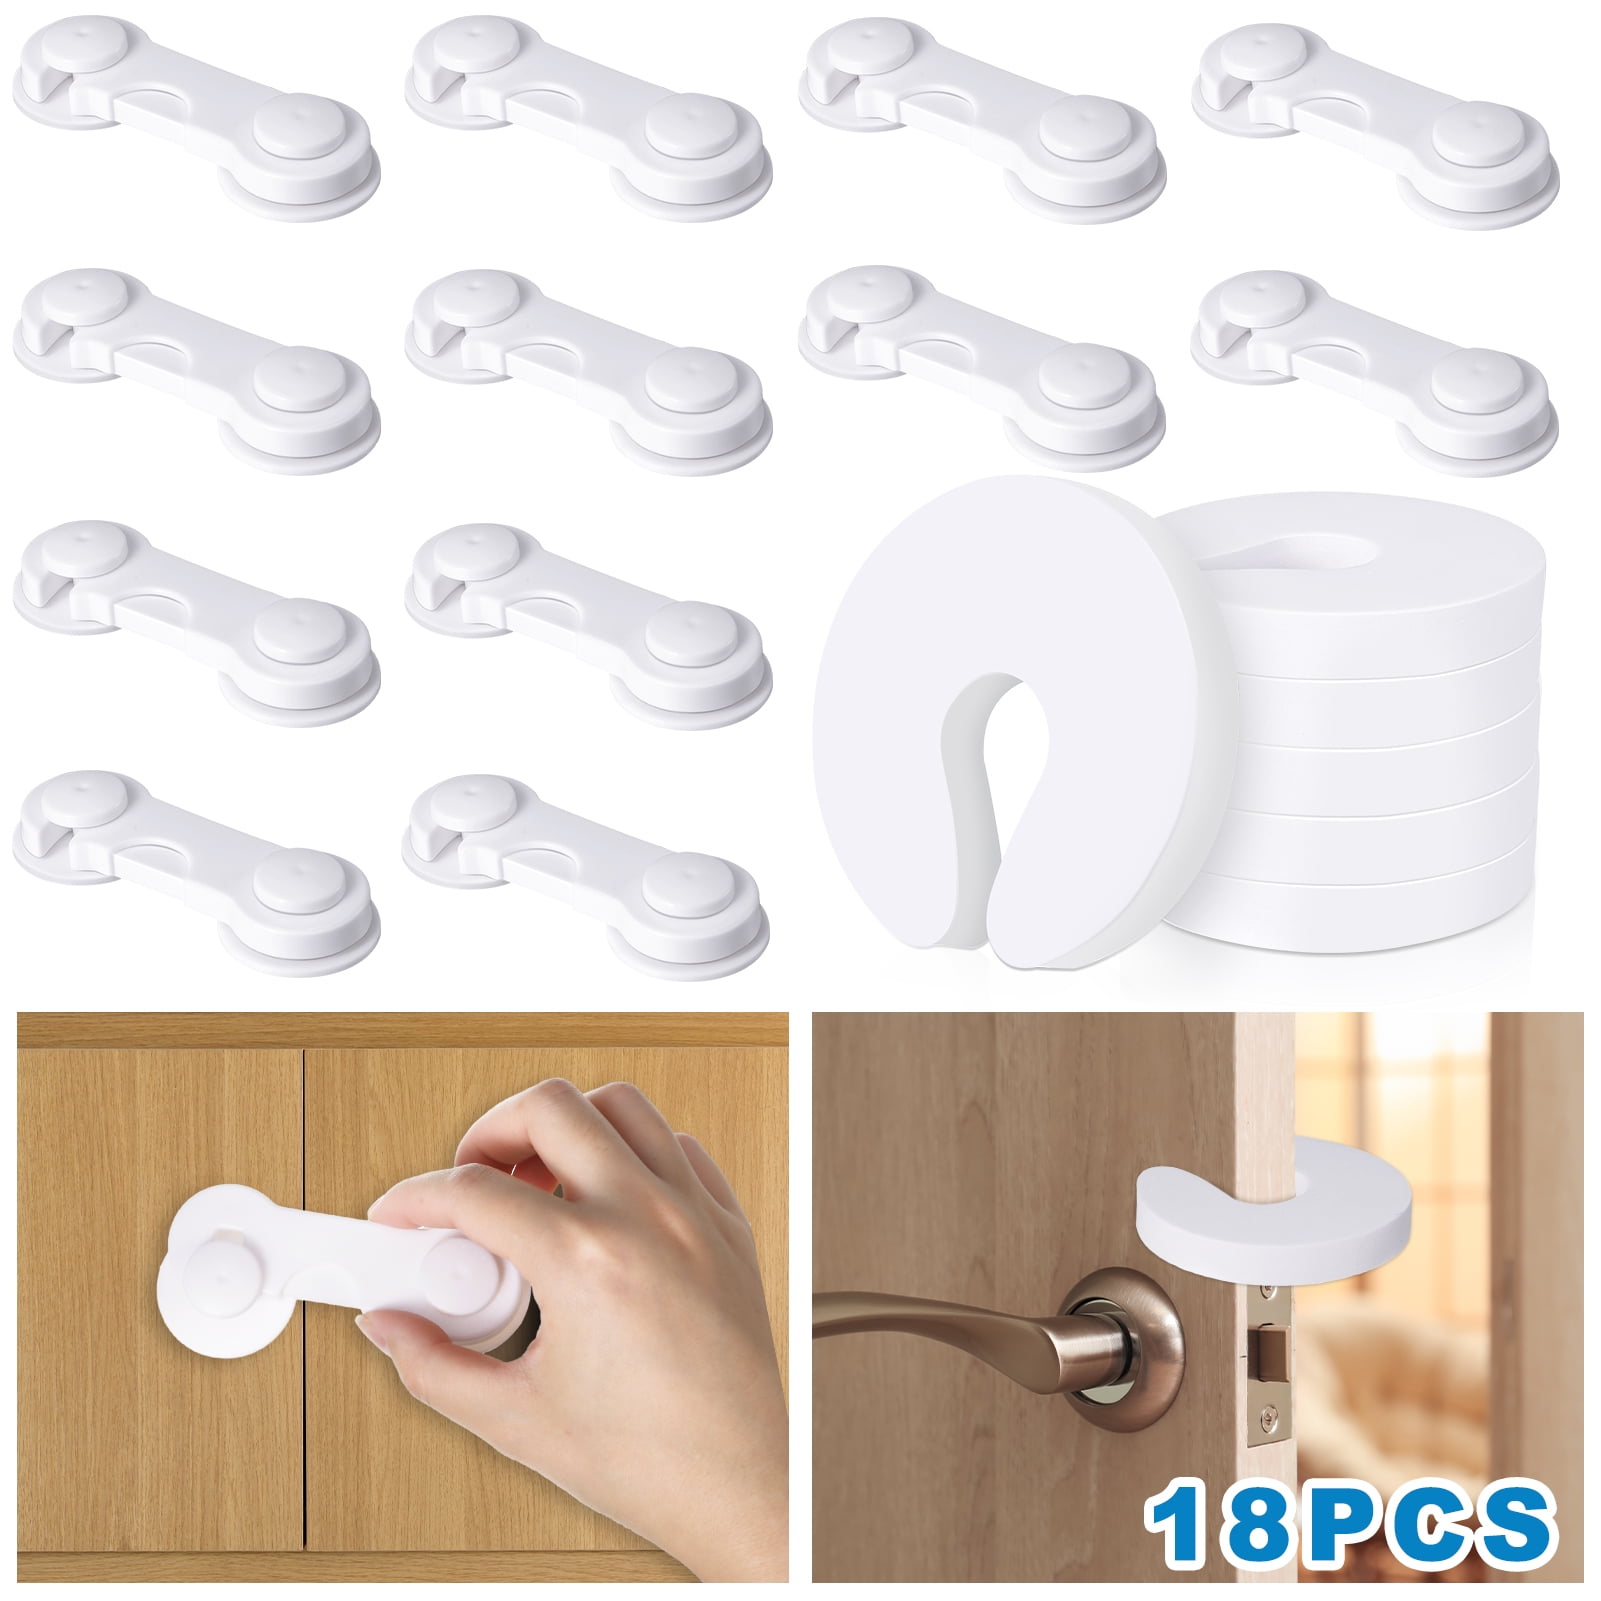  Safety 1st Lazy Susan Cabinet Lock : Baby